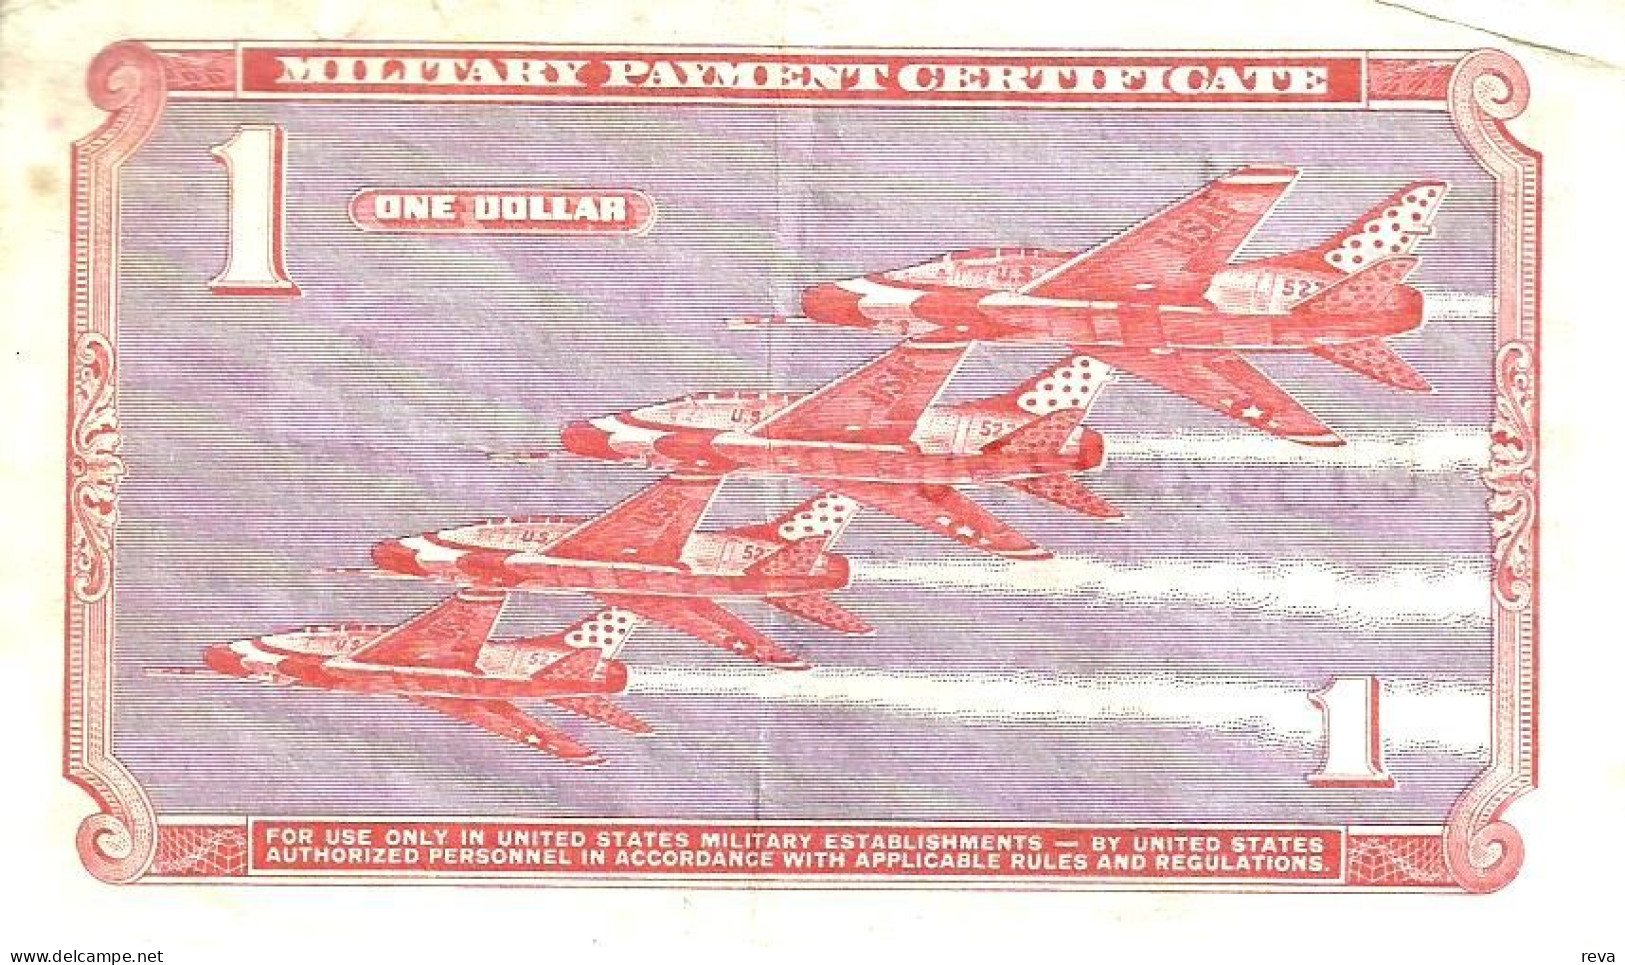 USA UNITED STATES $1 MILITARY CERTIFICATE PURPLE MAN AIRPLANES SERIES 861VF ND(1969) PM79a READ DESCRIPTION CAREFULLY !! - 1969-1970 - Reeksen 681